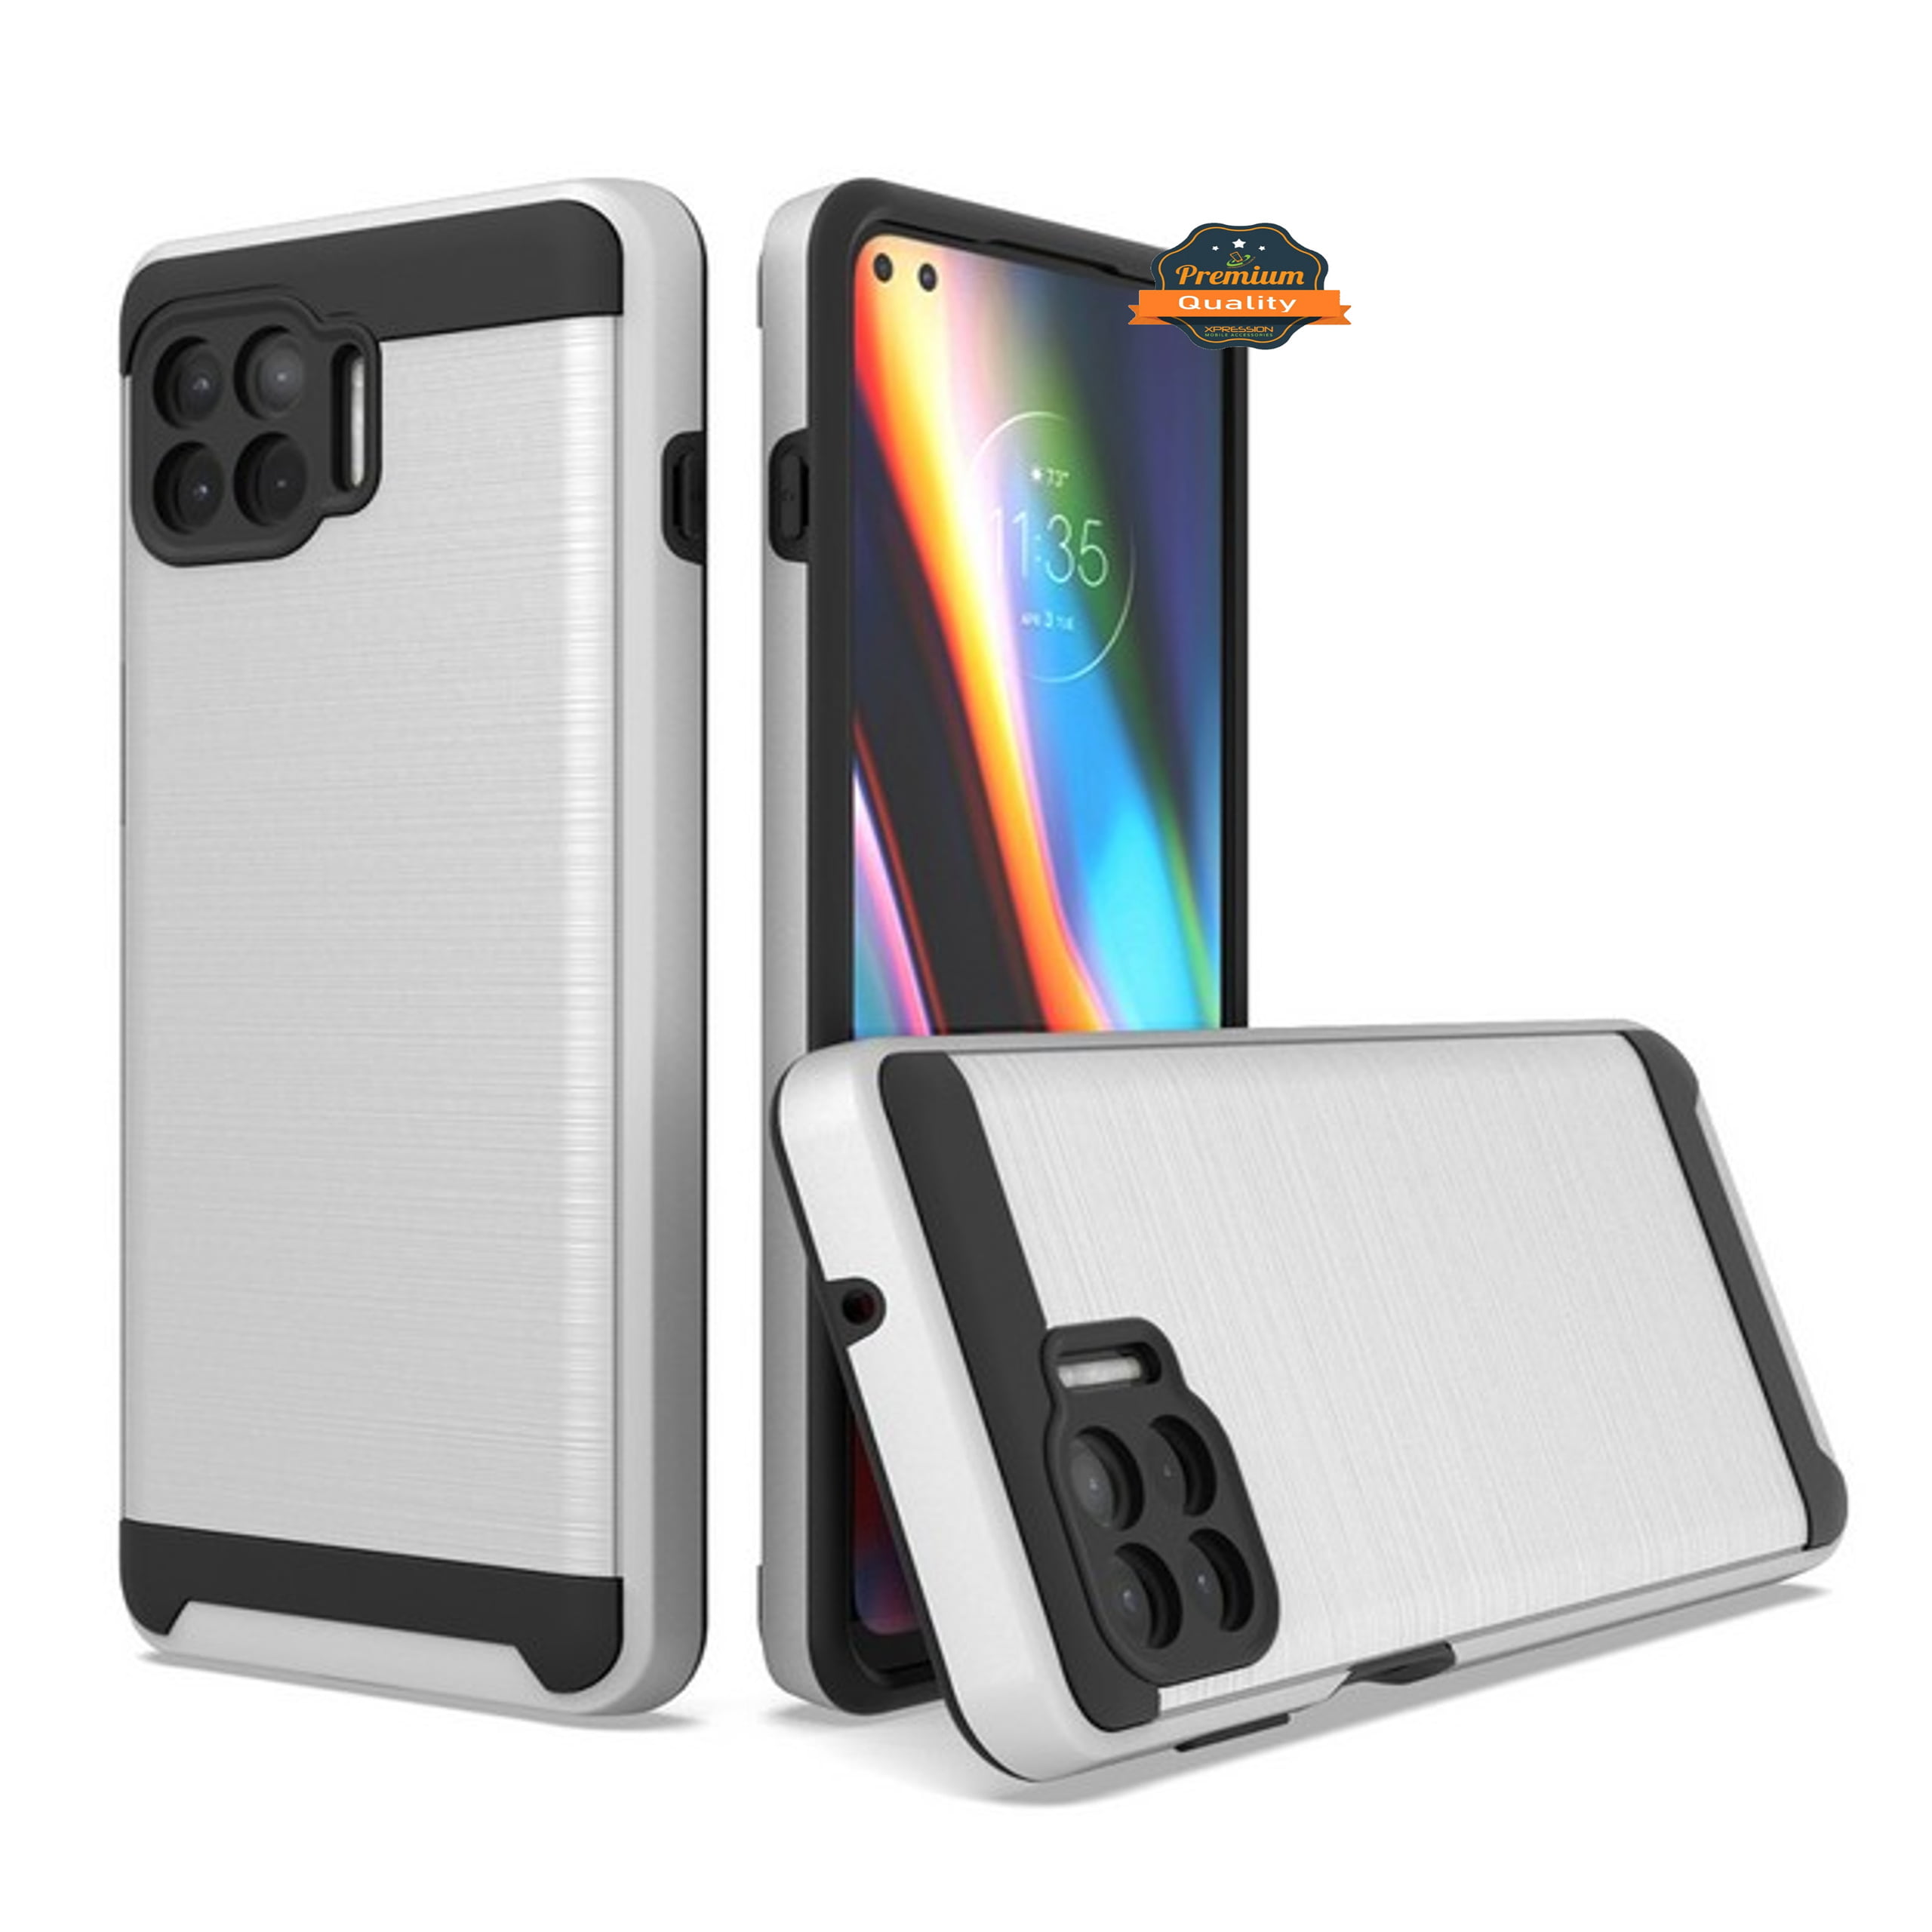 For Motorola Moto One 5G, Moto G 5G Plus Rugged TPU + Hard PC Brushed Metal Texture Hybrid Dual Layer Armor Shockproof Phone Case by Xpression [Silver] - Walmart.com